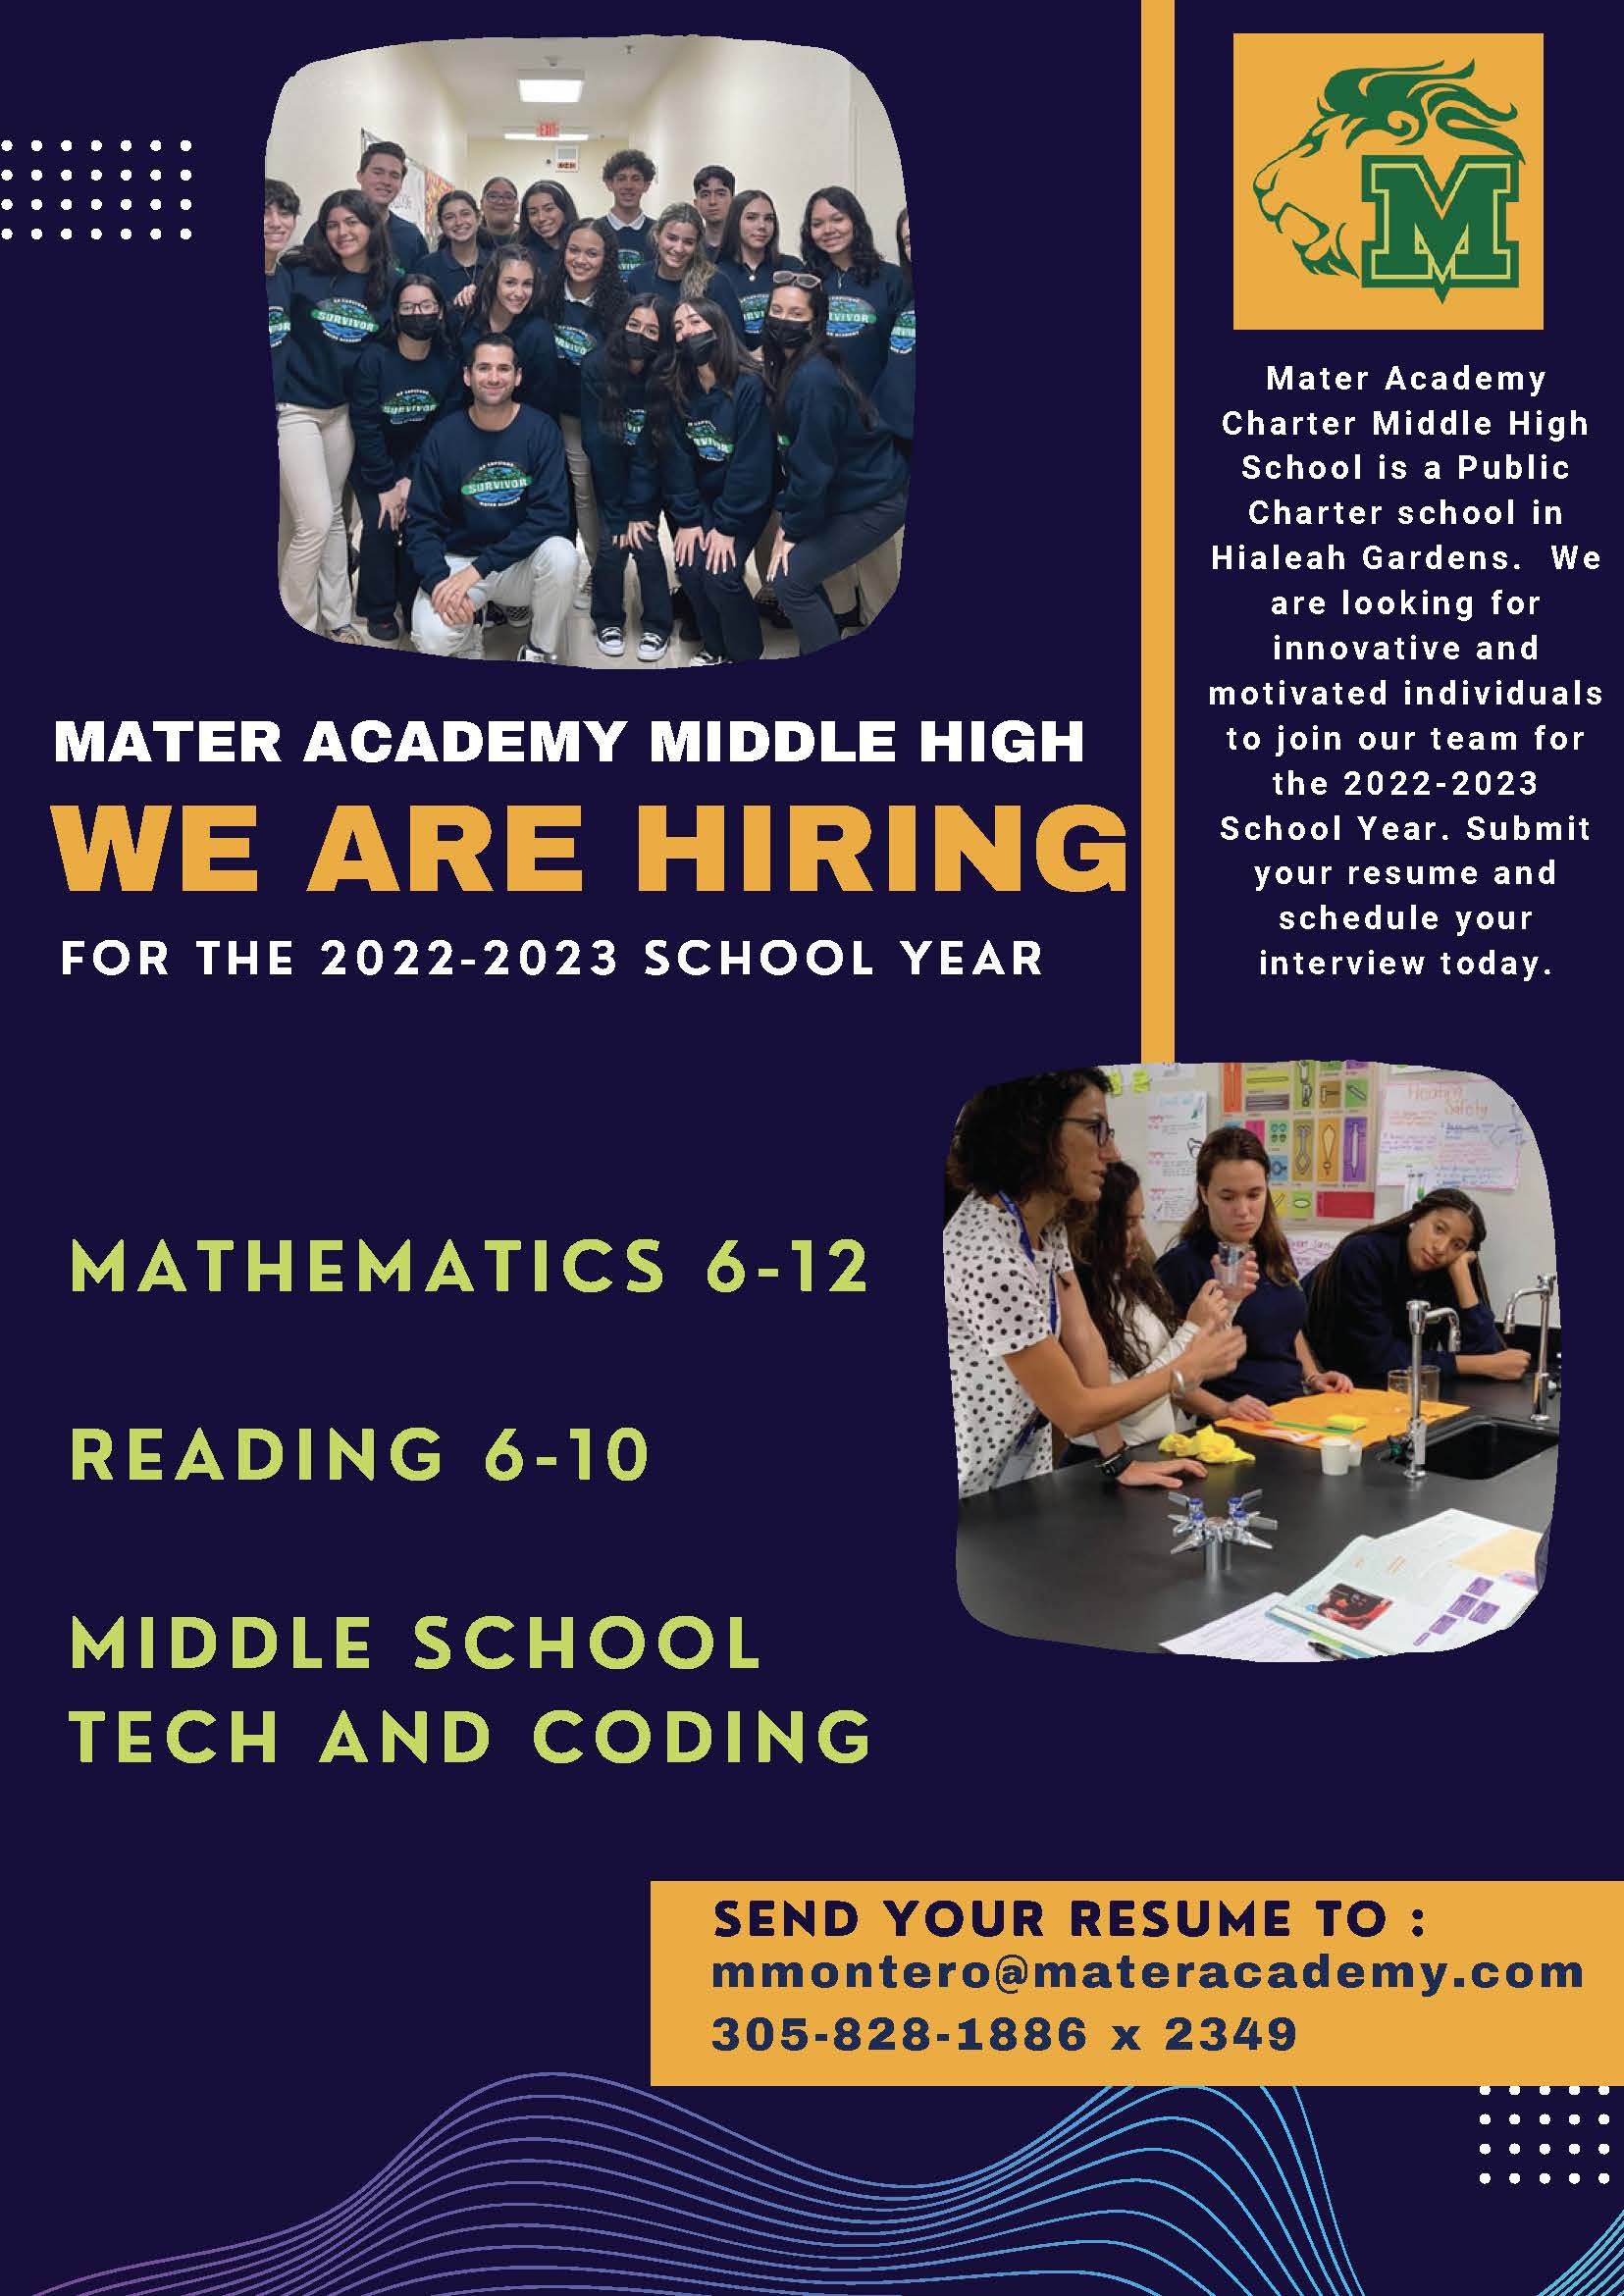 Mater Academy Middle High is Hiring for the 2022-2023 School Year